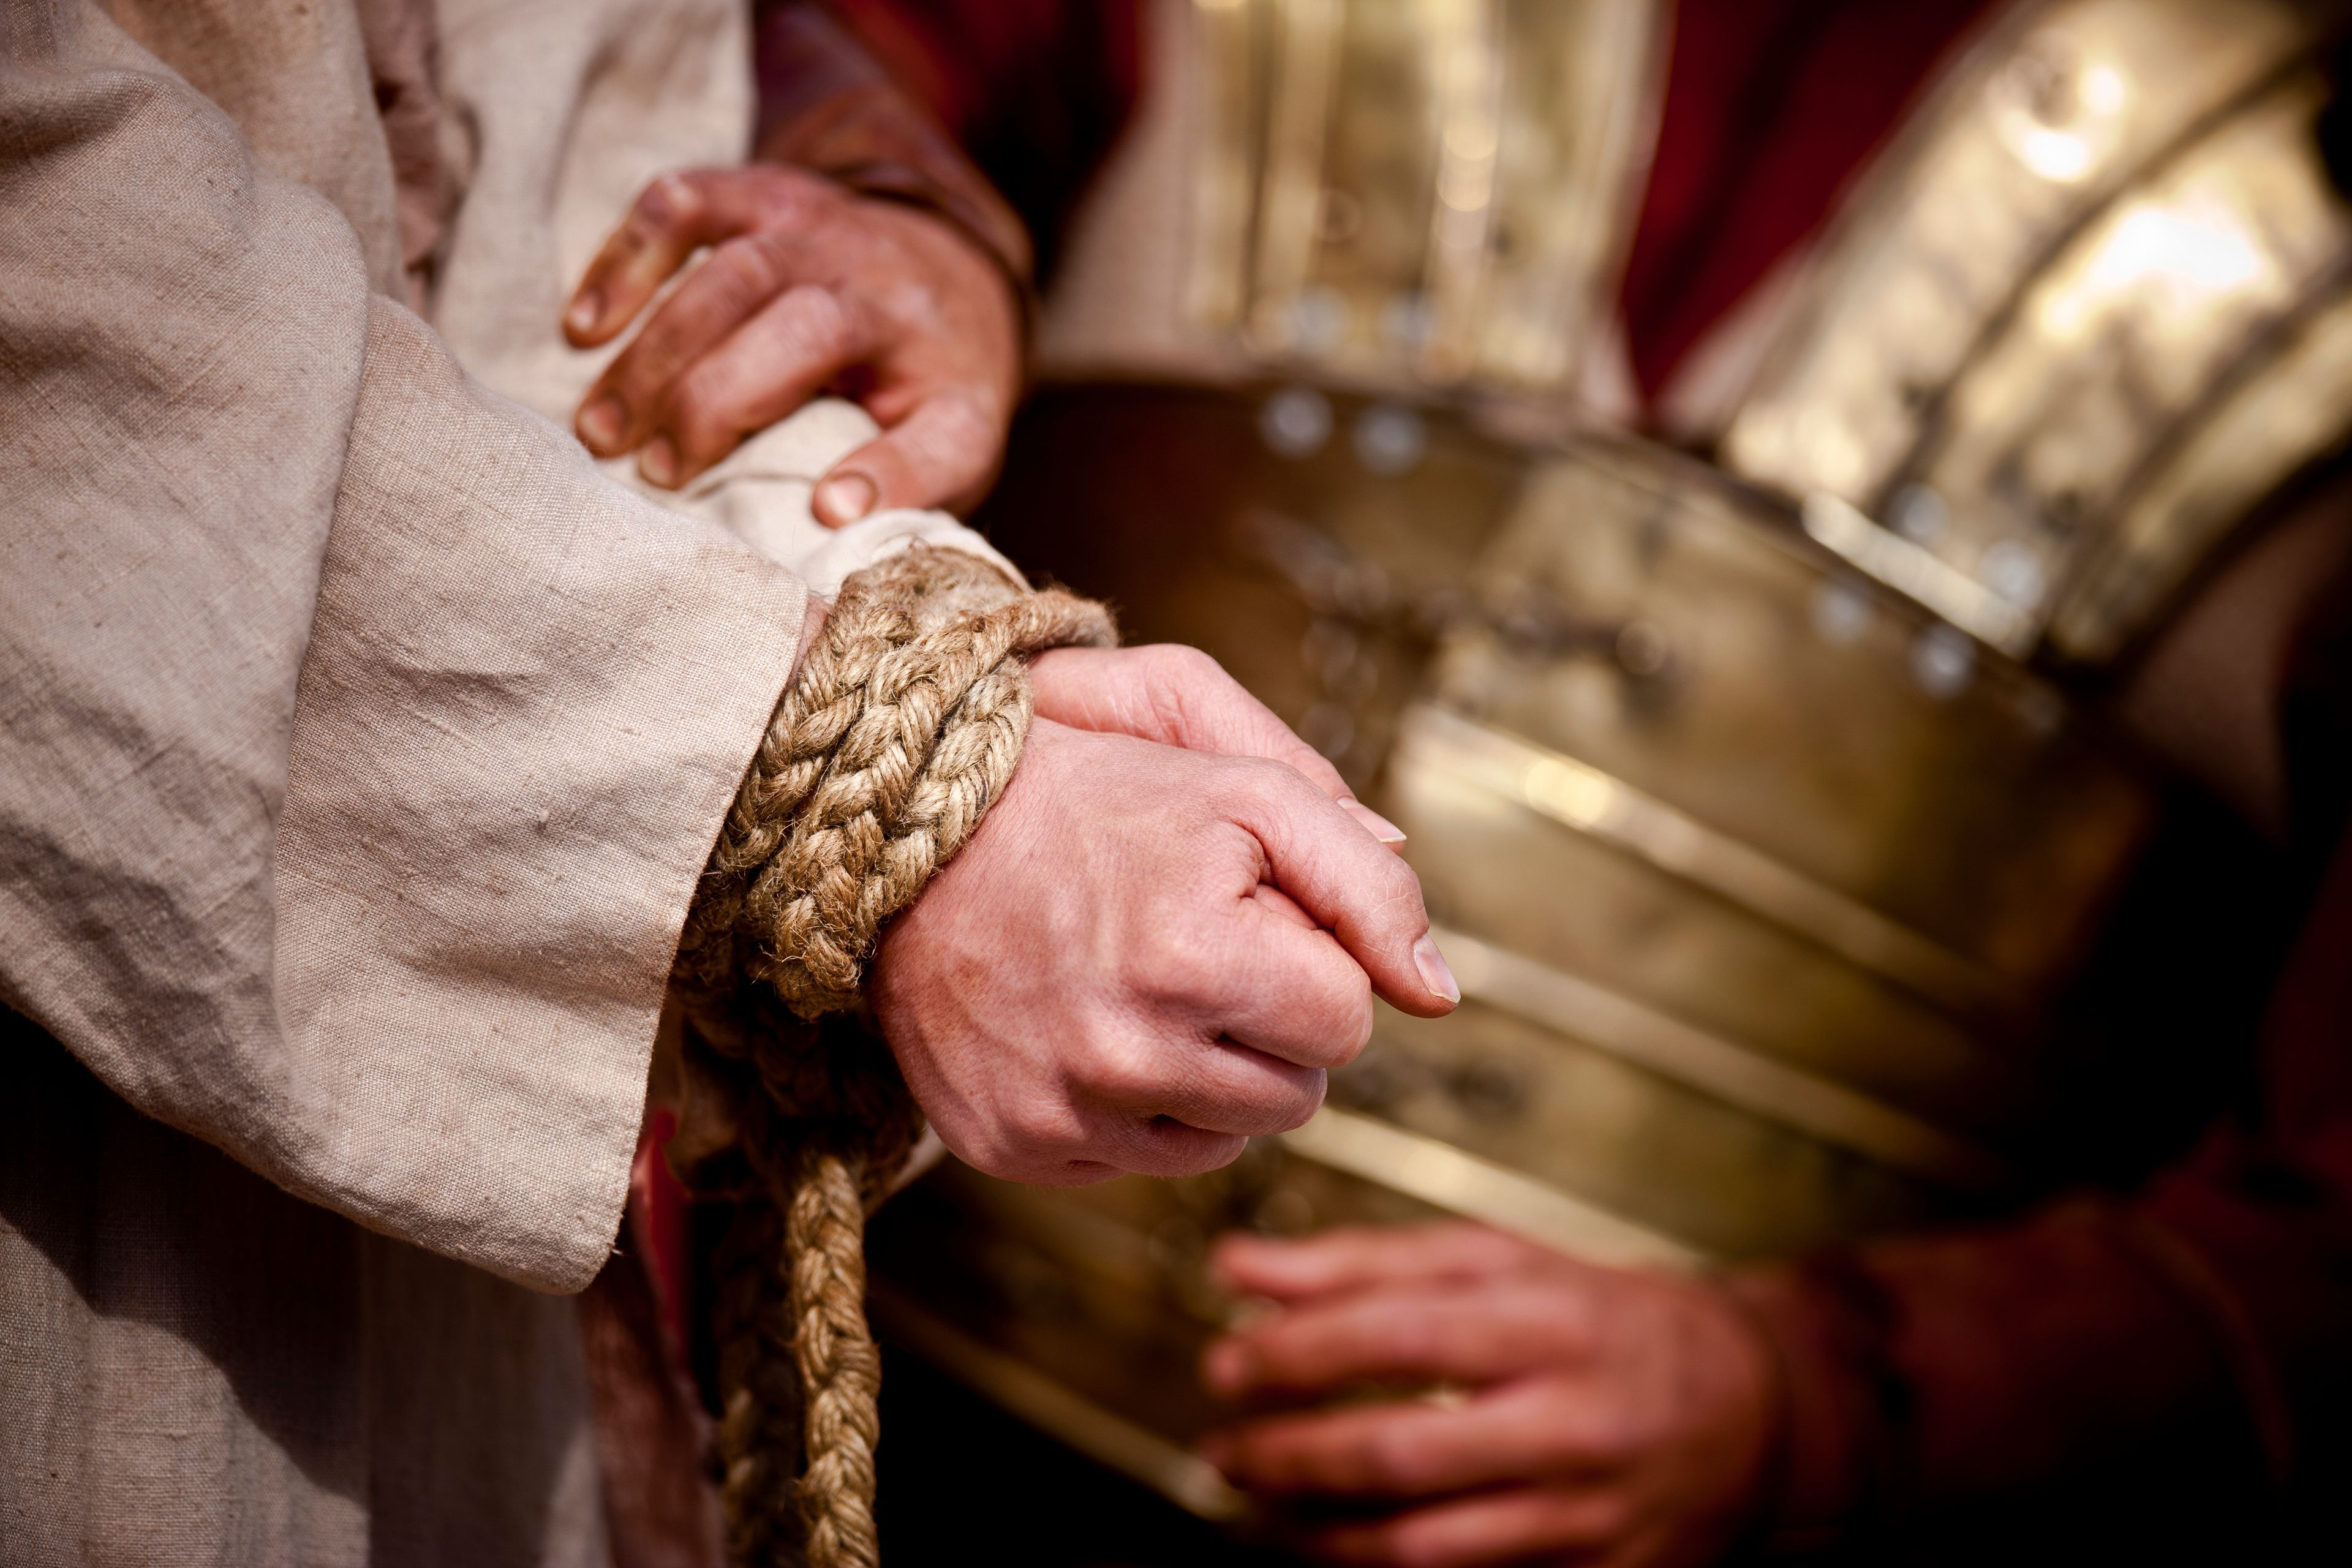 A Roman soldier binds the hands of Christ together.